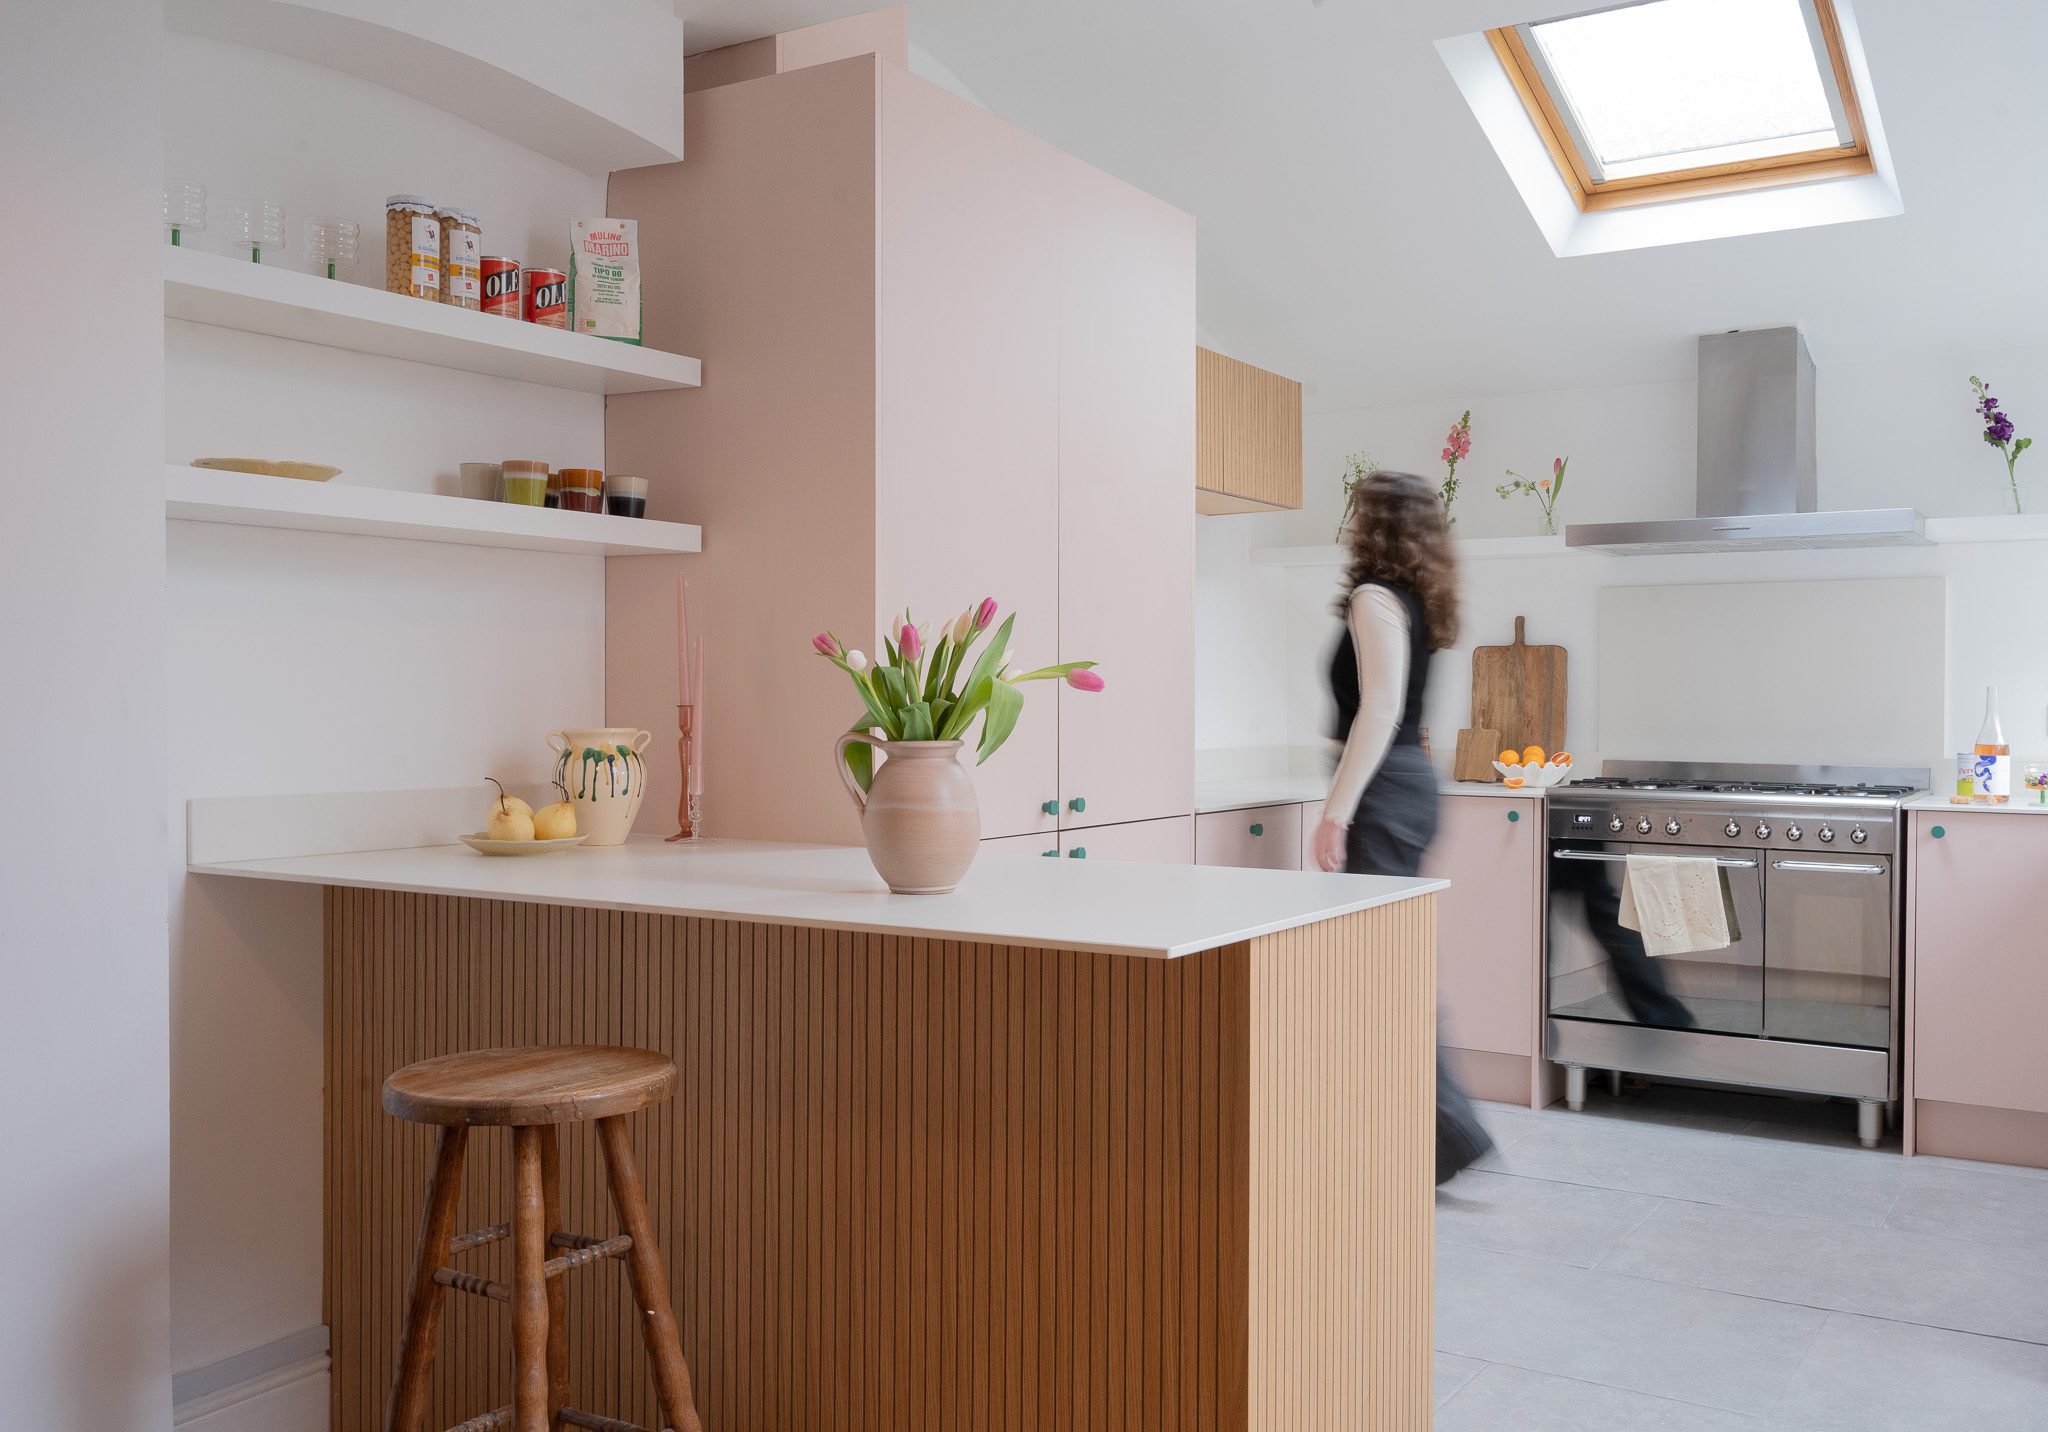 A bright kitchen with pink fronts and a white marble worktop.